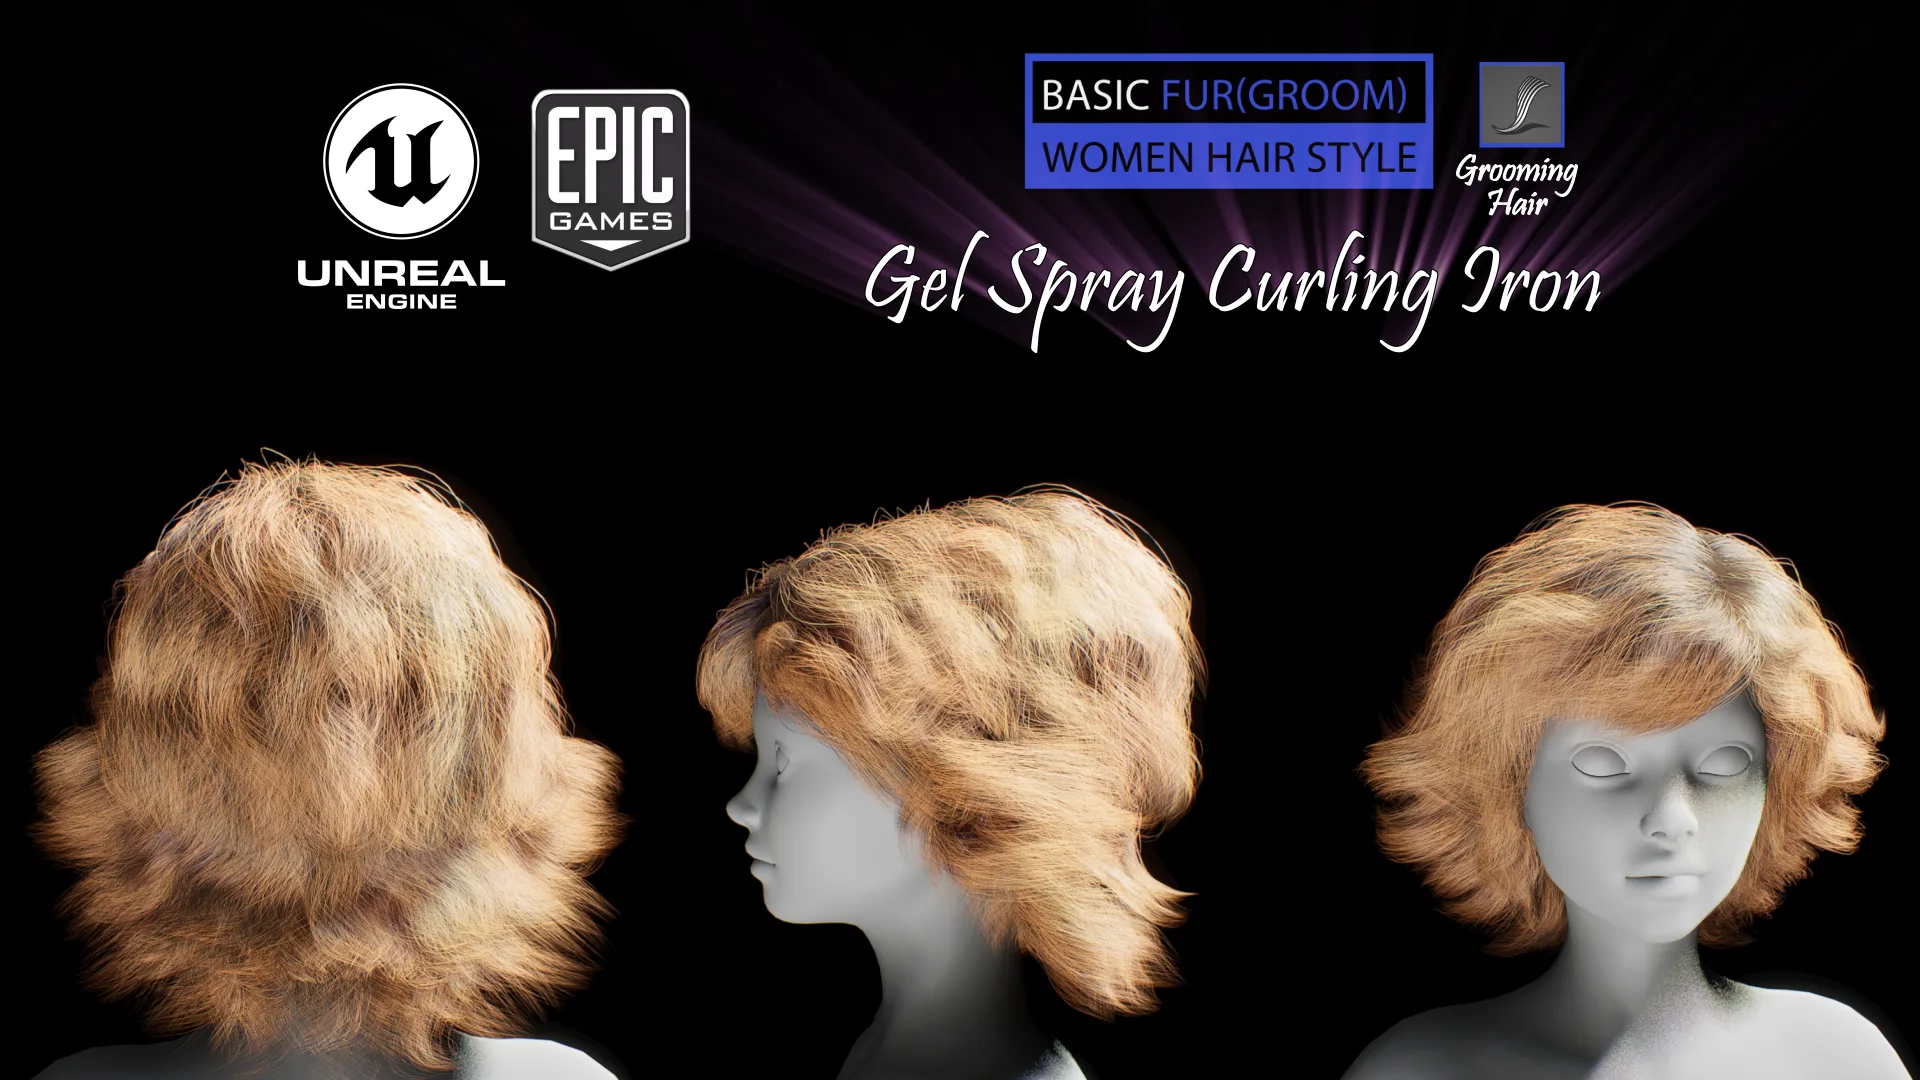 Gel Curling Iron Grooming Real-Time Hairstyle Unreal Engine 4